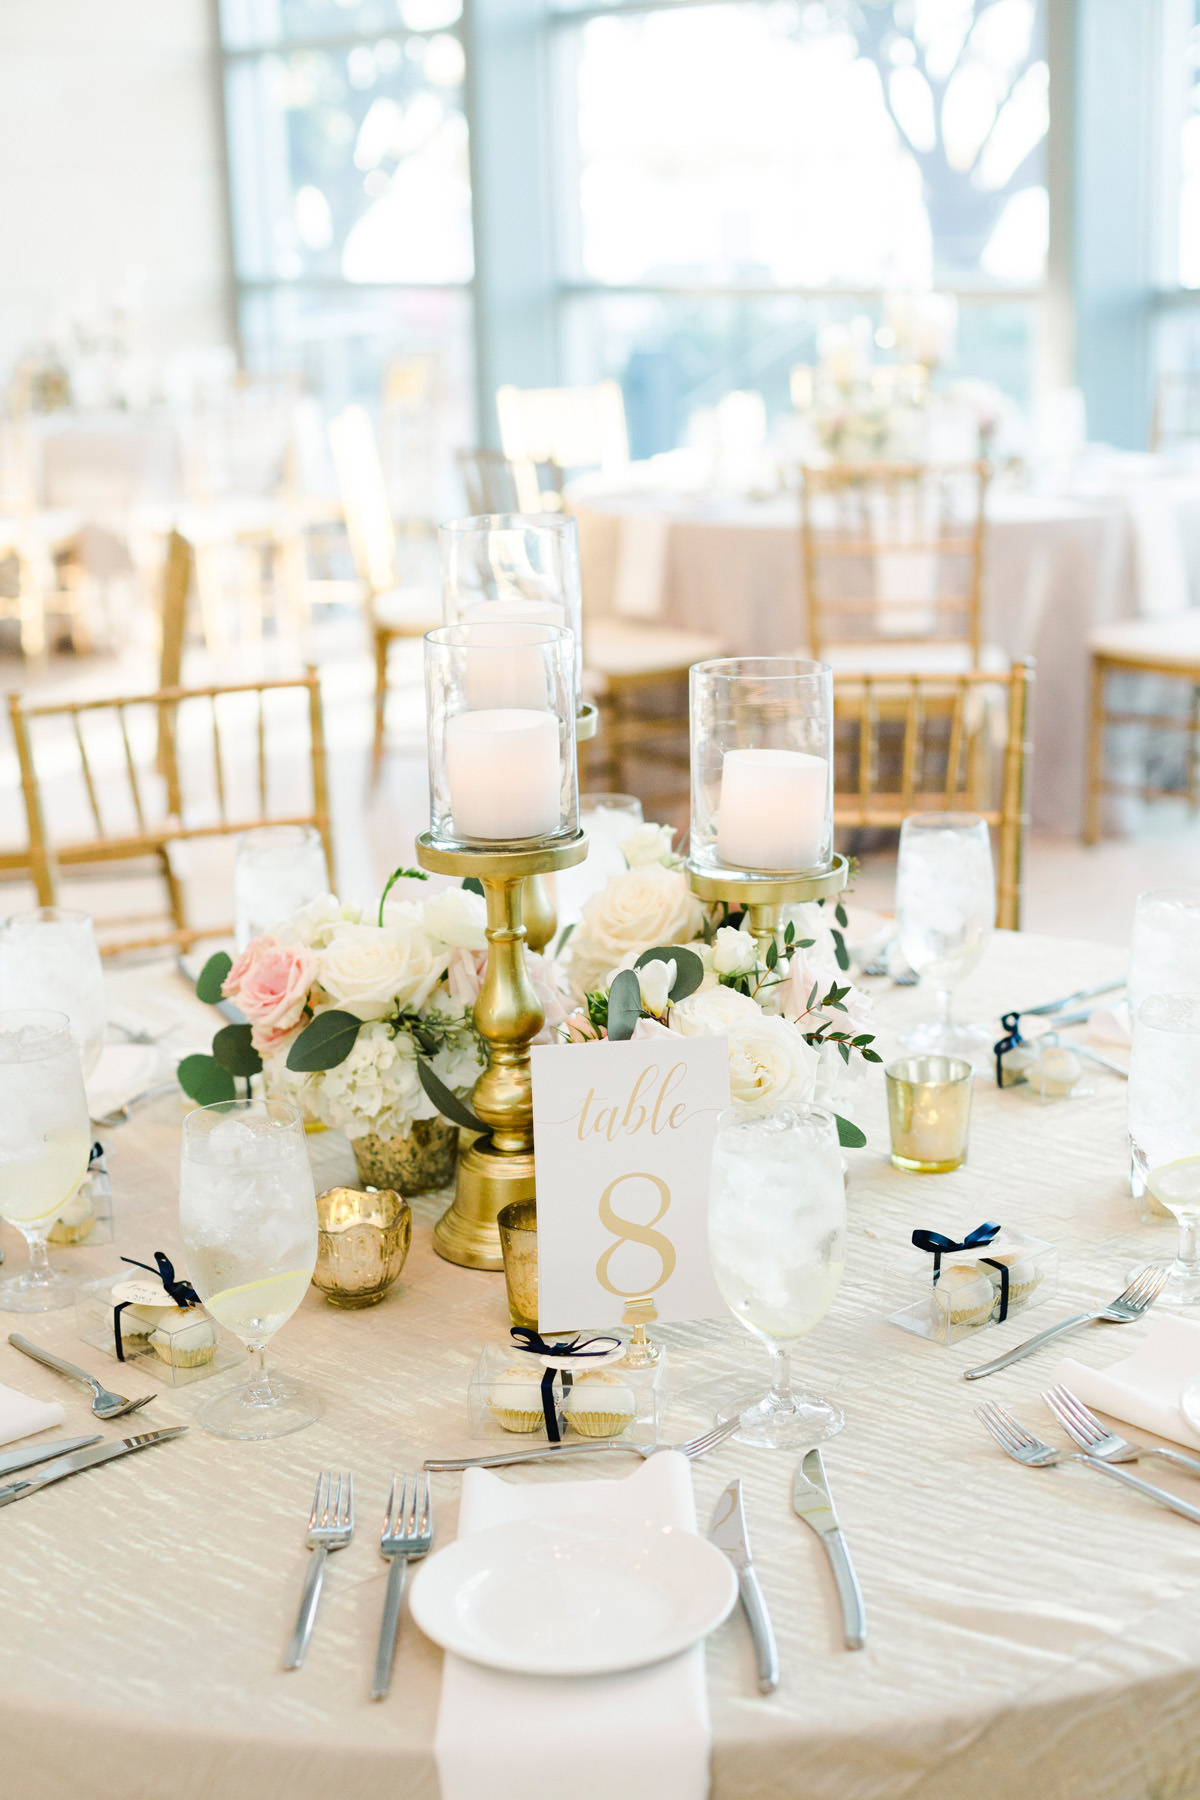 Indoor Wedding Reception Tables with Gold Chiavari Chairs and Gold Candlestick Centerpieces with White Hydrangea and Blush Pink Roses and Eucalyptus Greenery | Bruce Wayne Florals